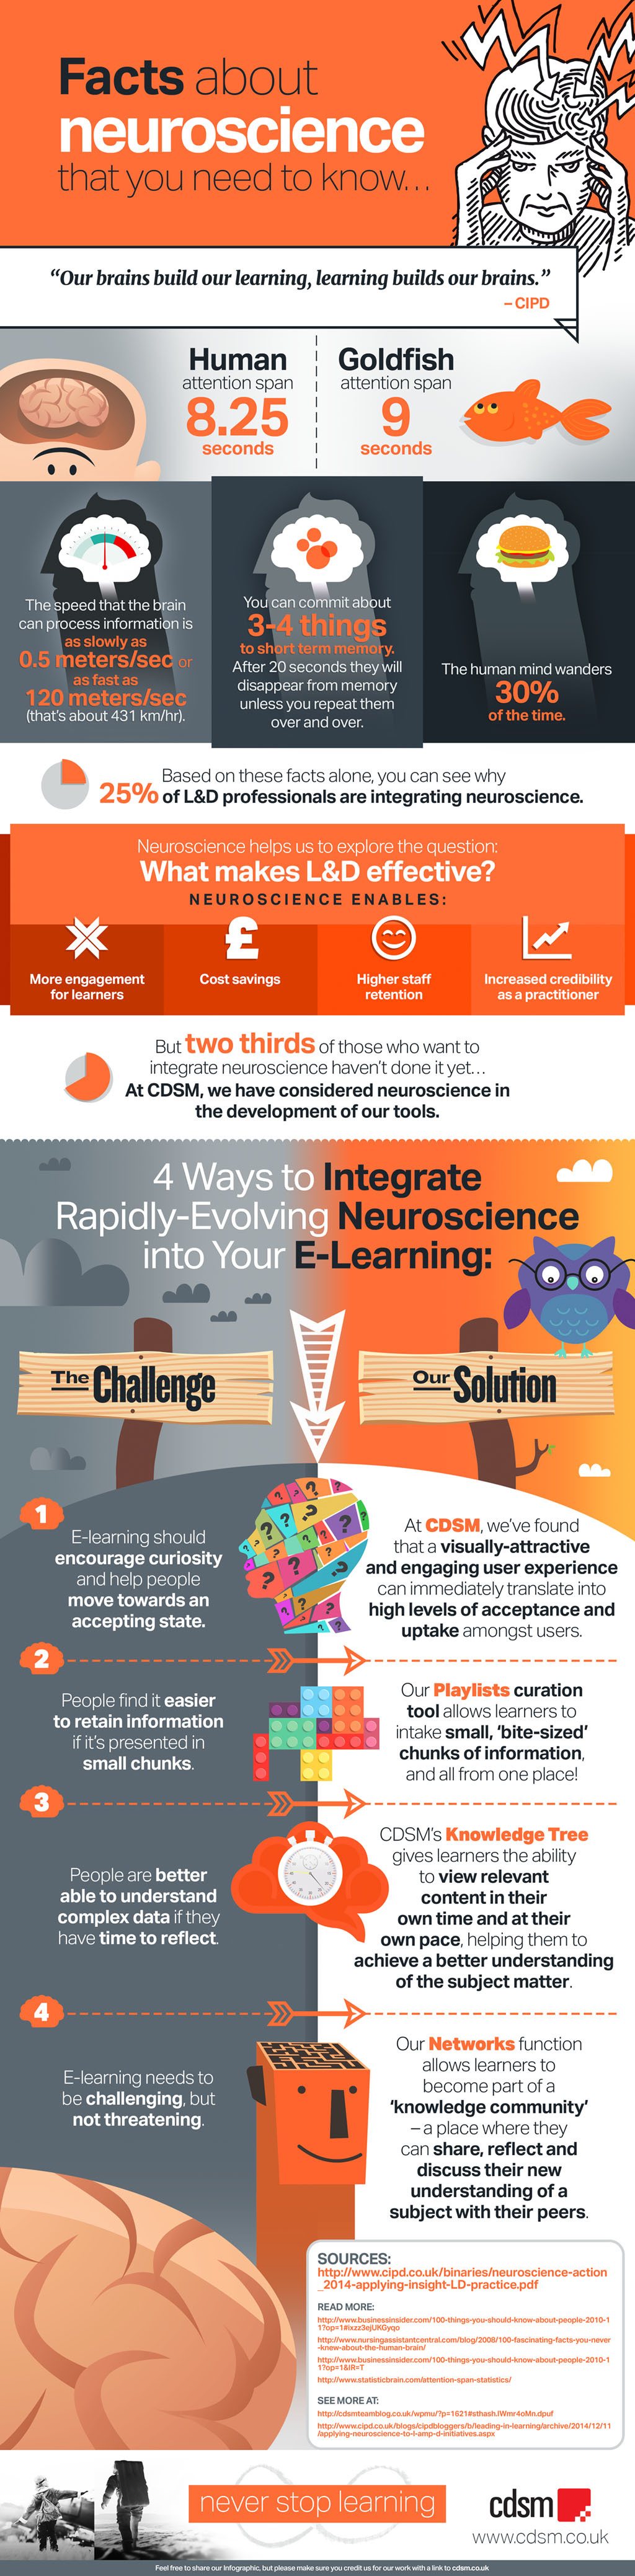 How to Integrate Neuroscience into Your eLearning Infographic